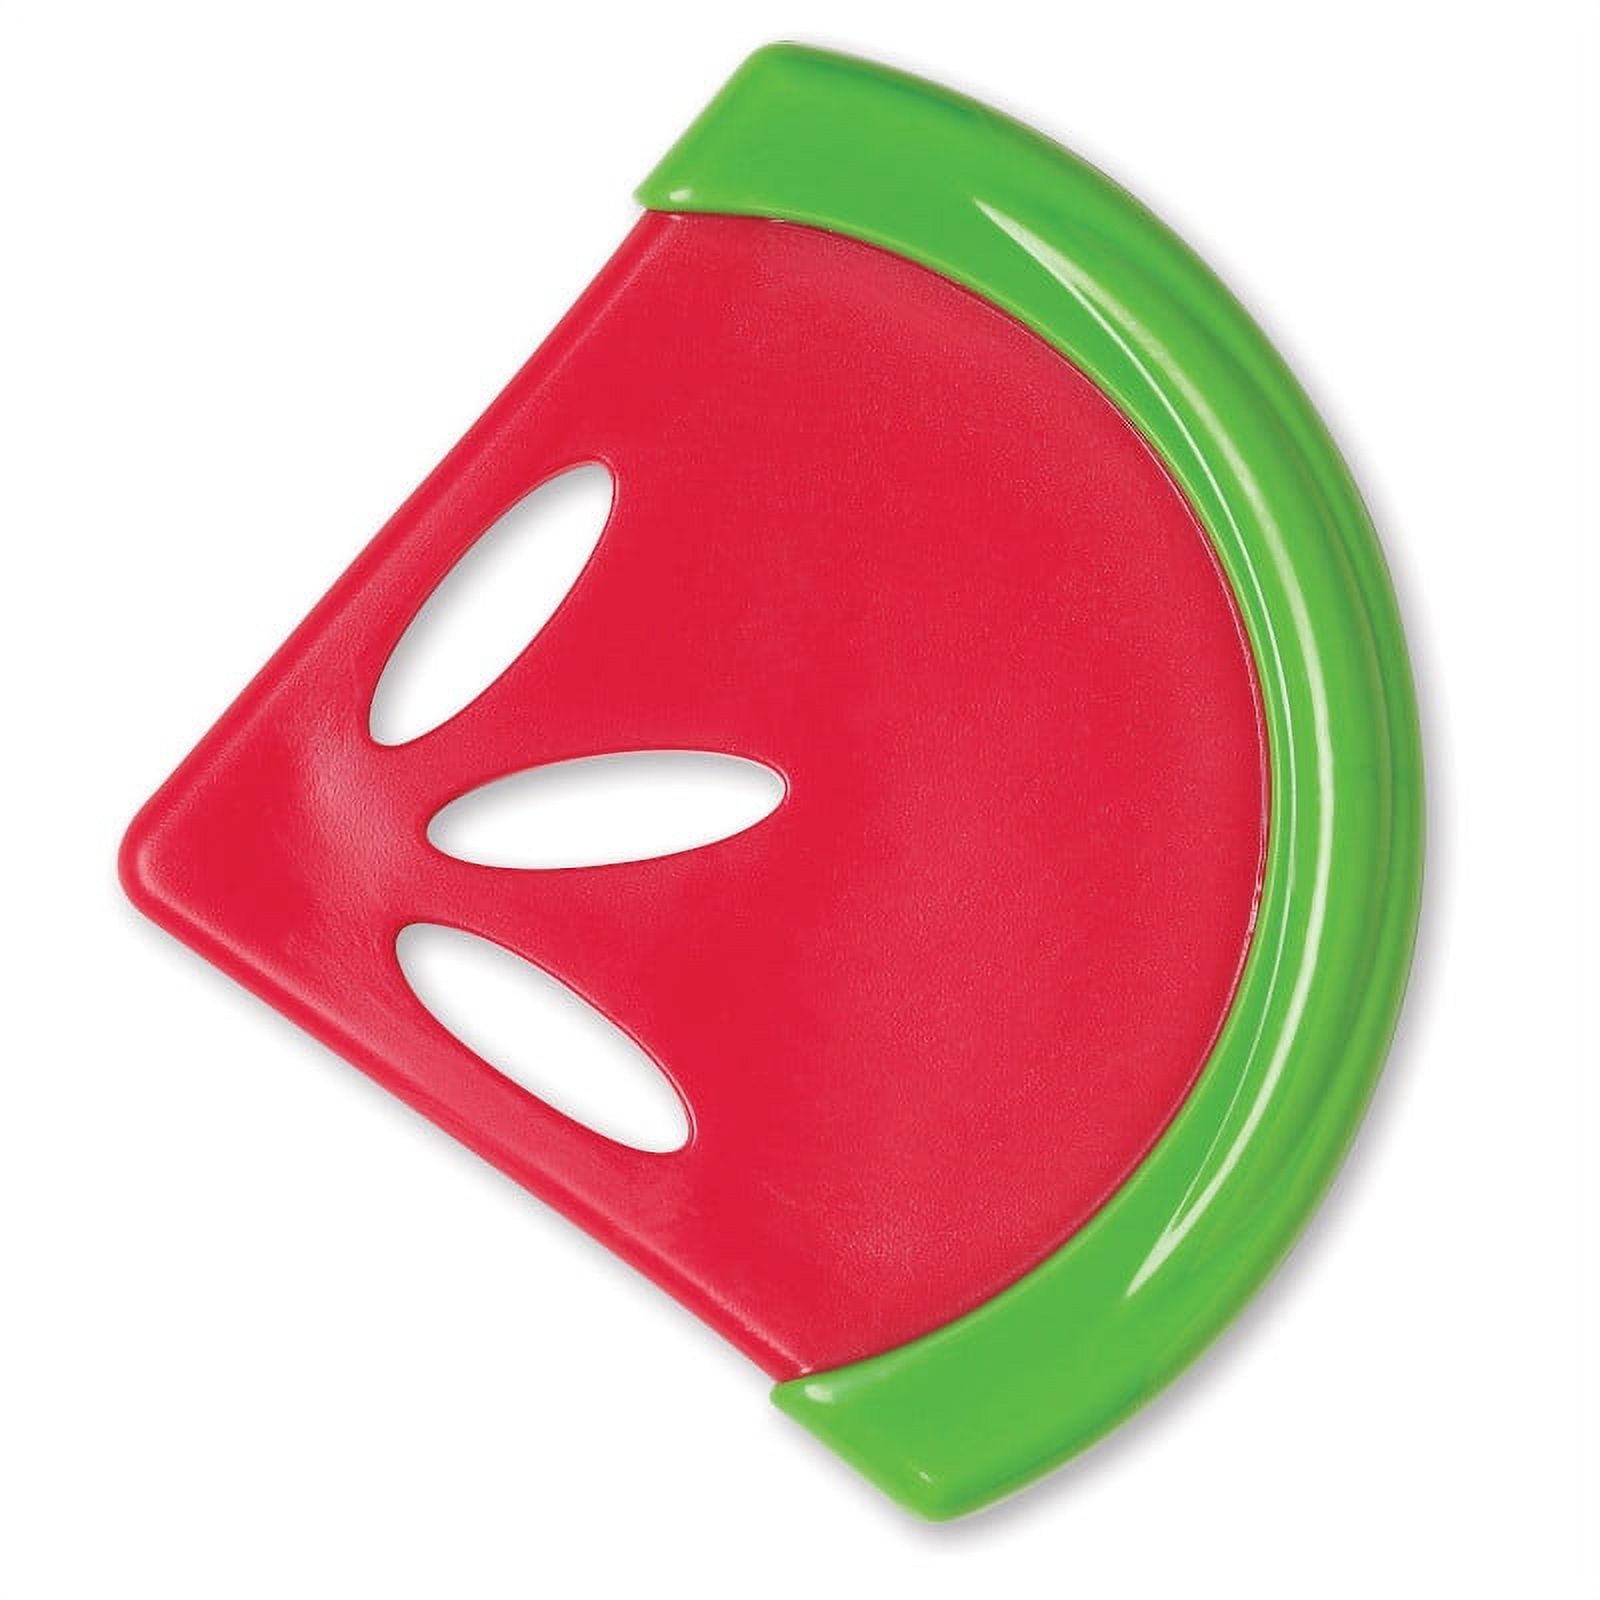 Dr. Brown's Coolees Soothing Teether, Watermelon - image 1 of 9